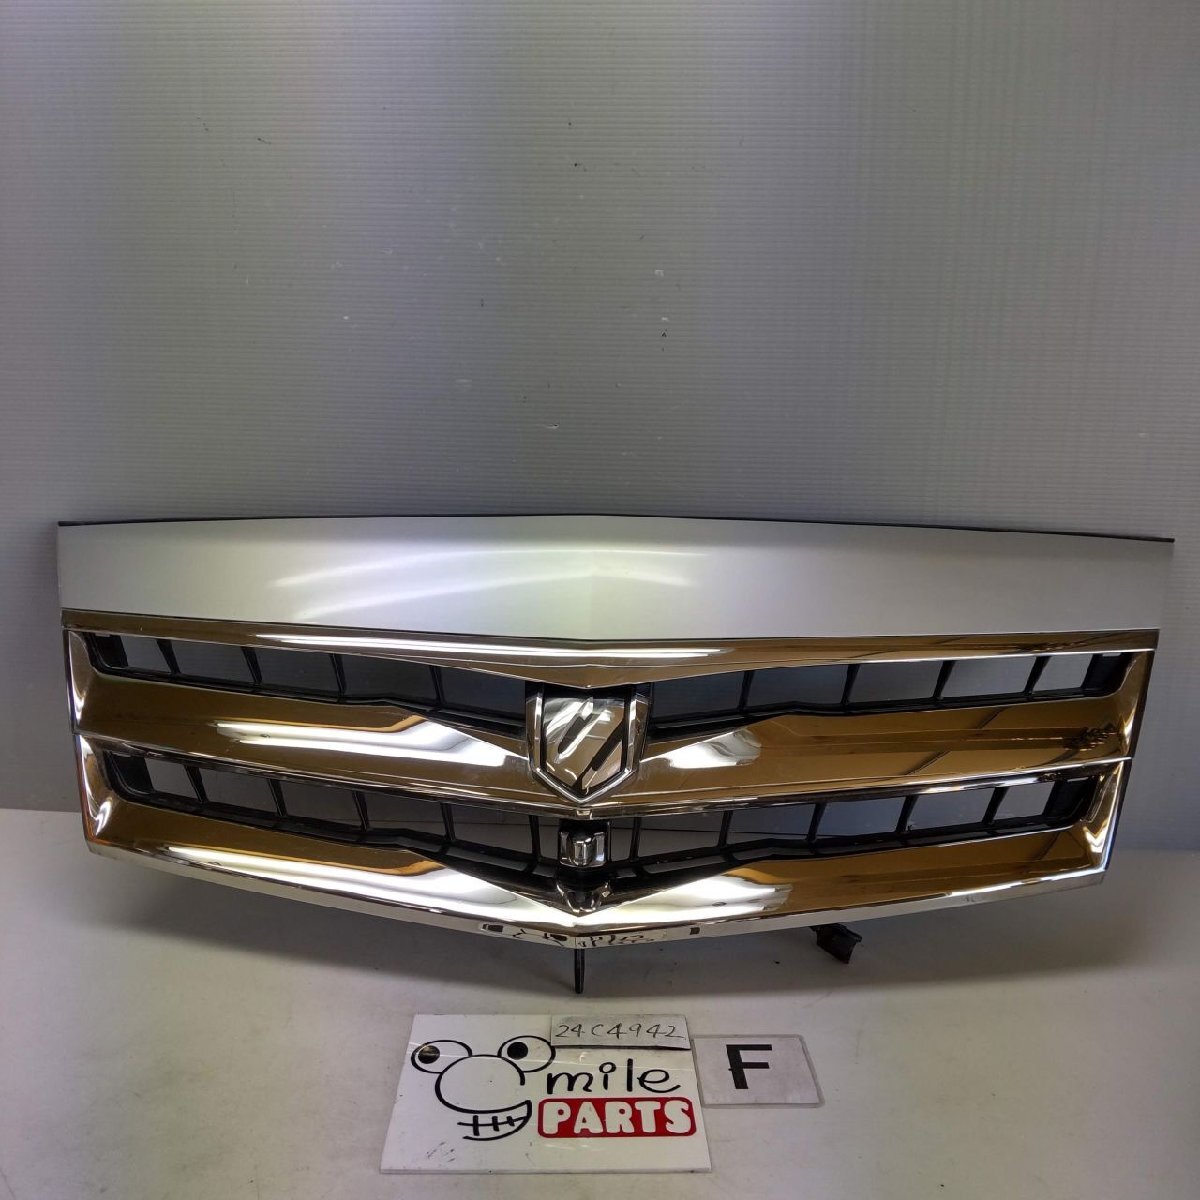 ATH10W Alphard Hybrid genuine grille ( camera attaching )1C3-6-2/-24C4942* including in a package un- possible 